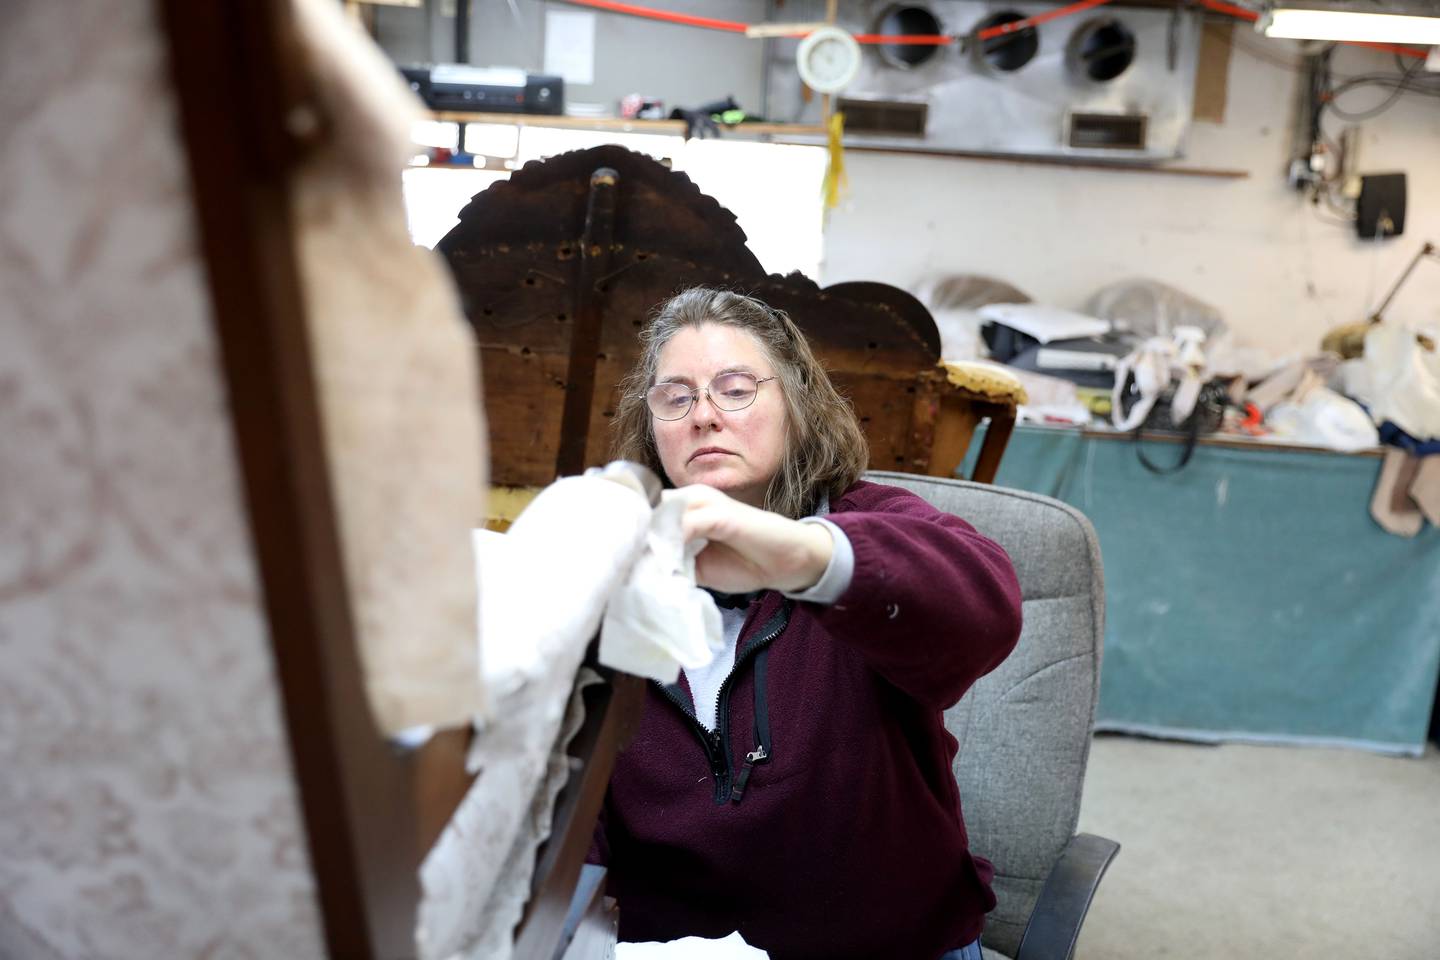 Ruth Scott applies wax to a piece of furniture at Valley Upholstery and Design in Batavia. Following the September 2021 death of Valley Upholstery and Design owner Jesse Pitts, his family and friends, including daughter Jesseca Watson, wife Eloise and friend Ruth Scott, have been working diligently to complete his customers’ projects and keep the shop open.